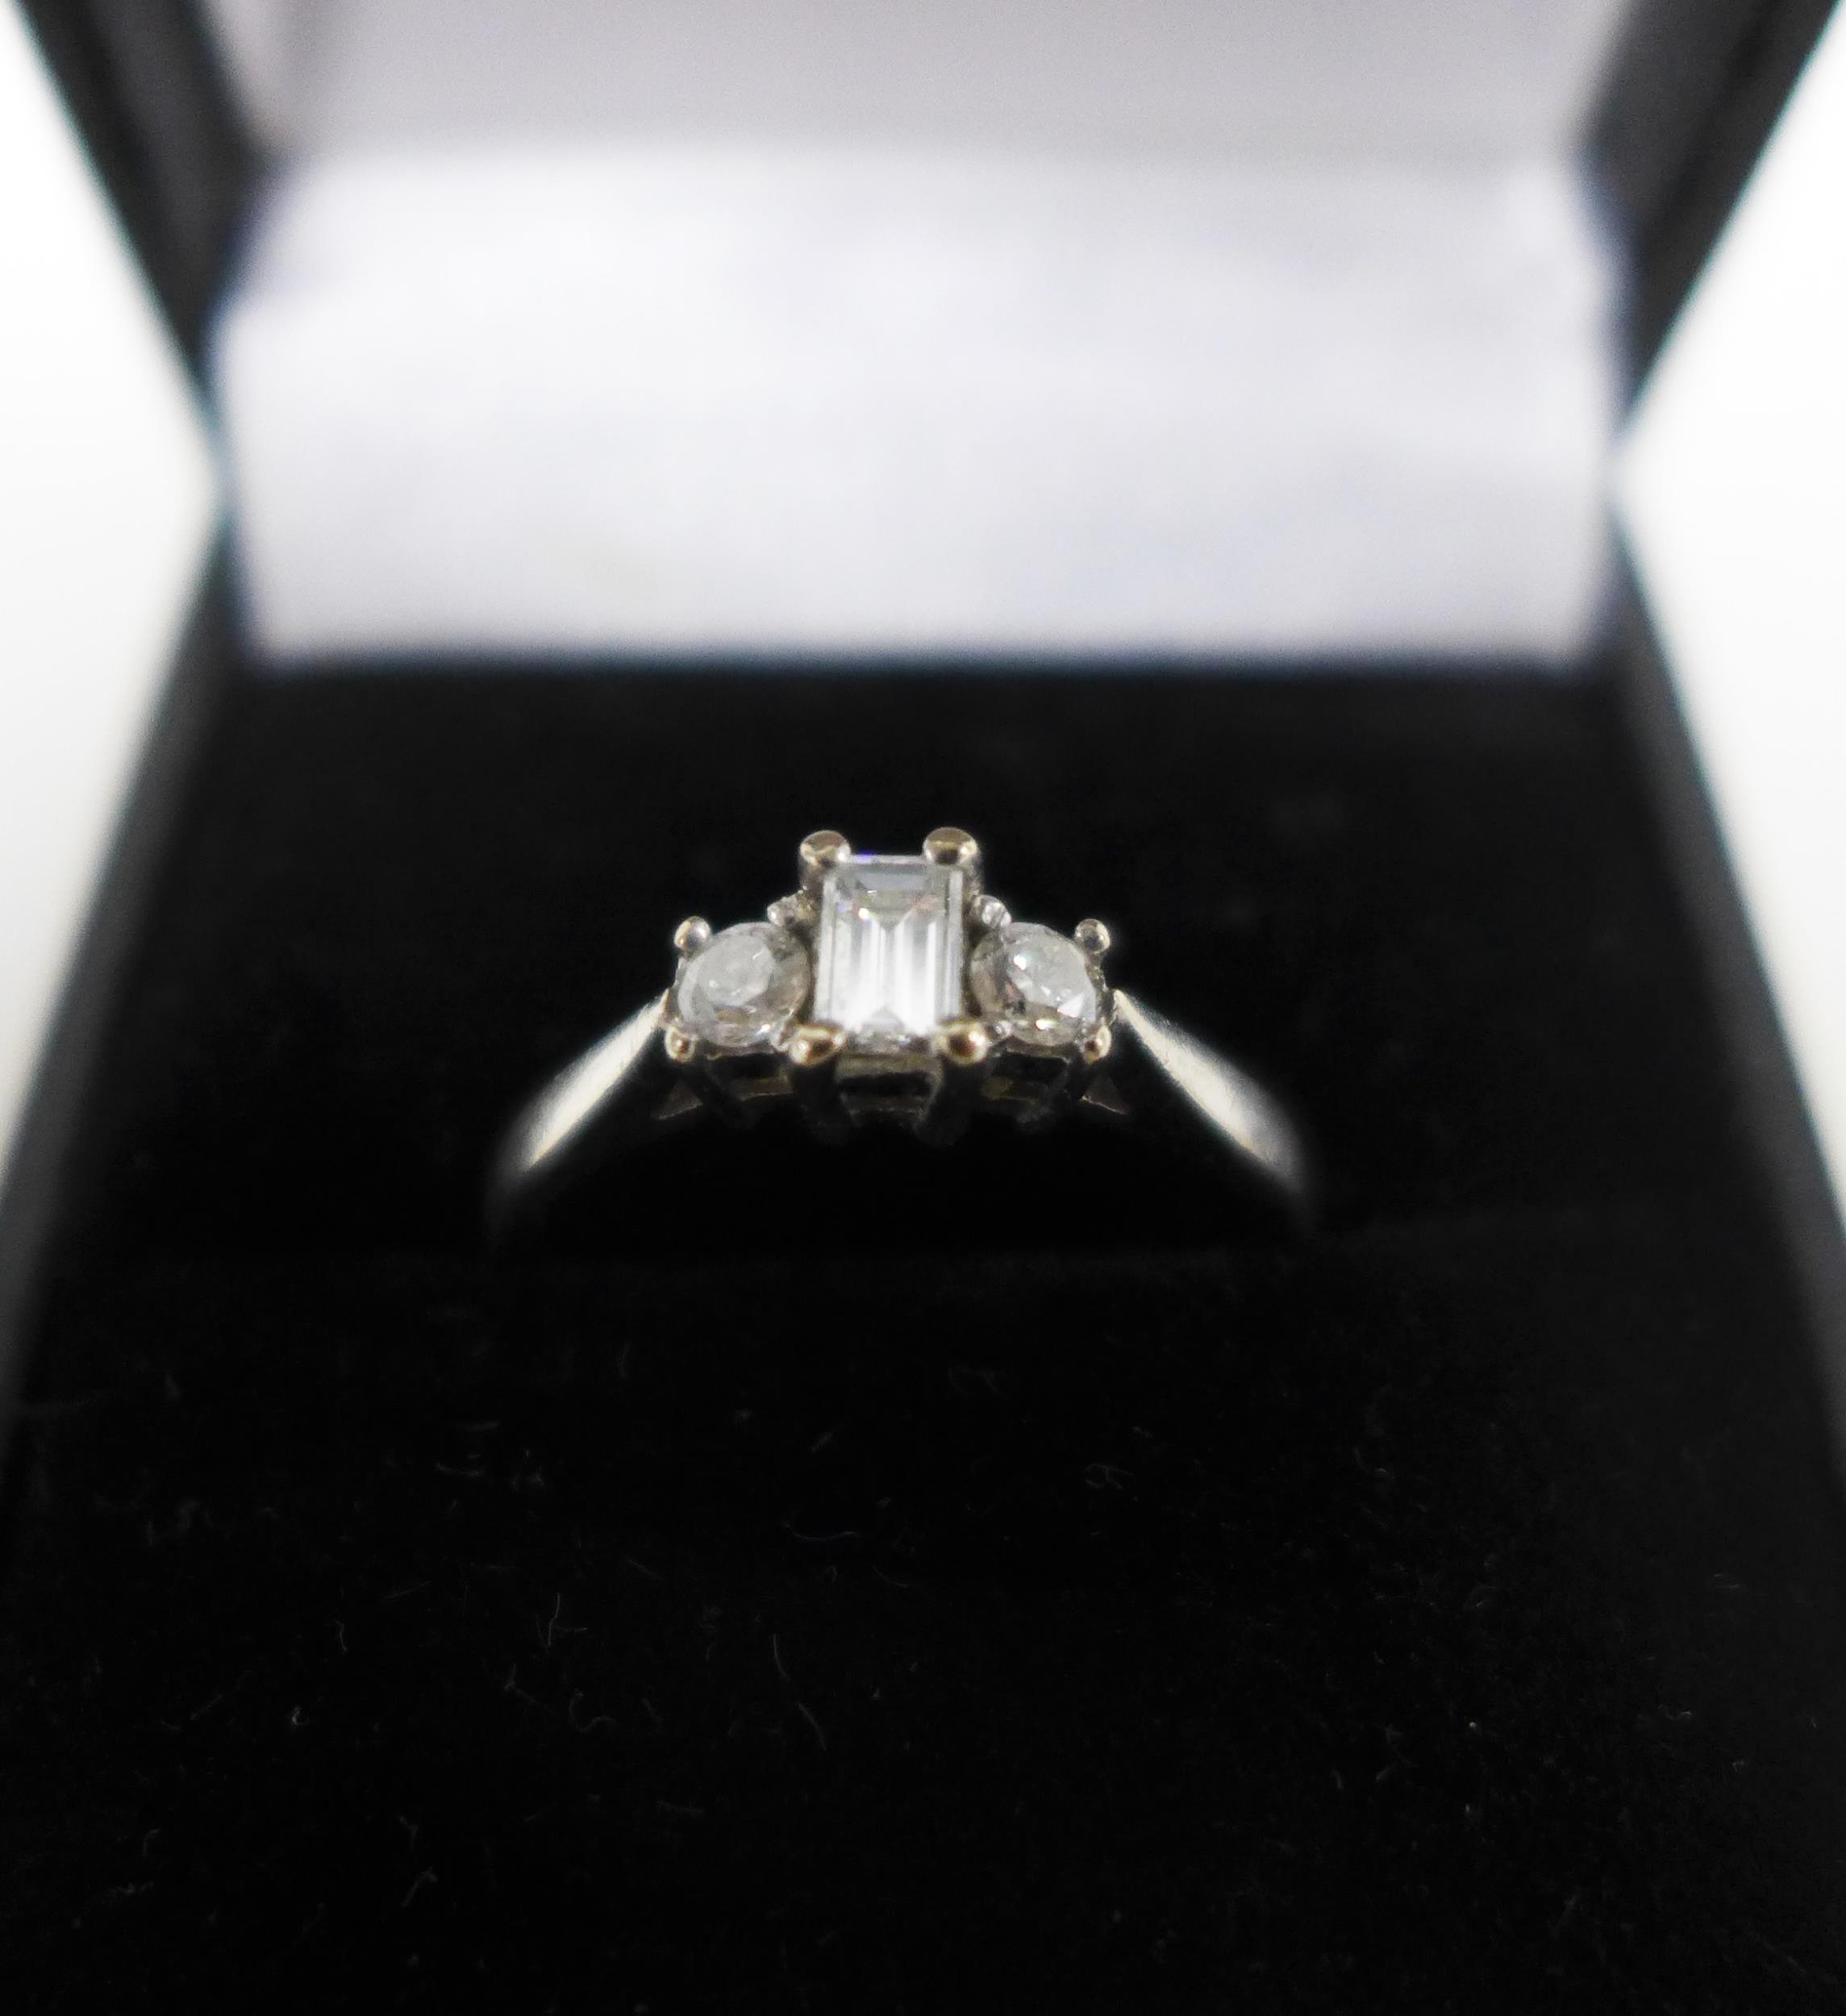 18ct white gold and three stone diamond ring, claw set with a baguette cut diamond flanked by round